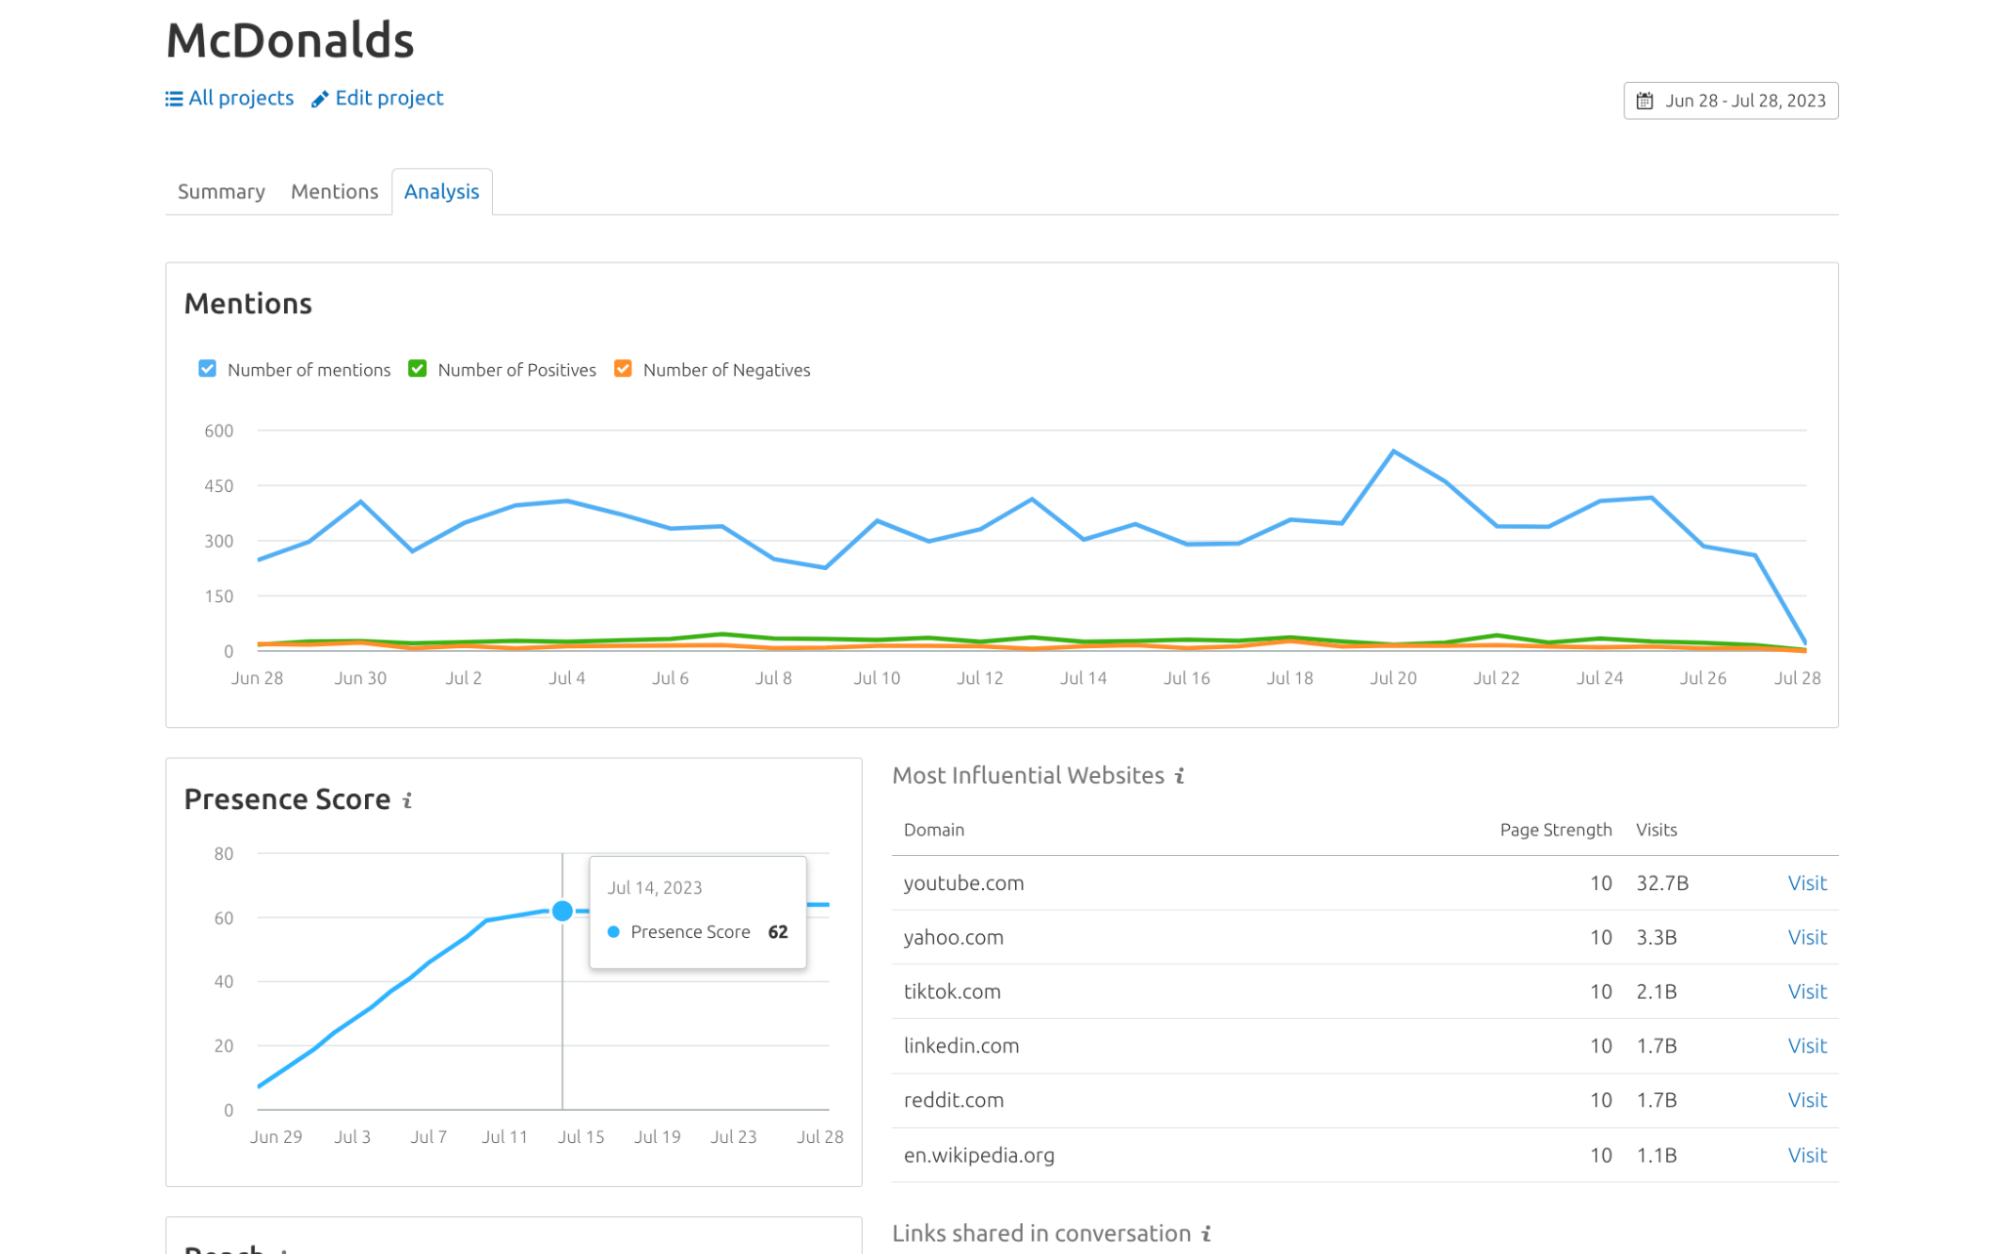 A screenshot of the Media Monitoring app shows a graph analysis of McDonald’s web presence and brand mentions.